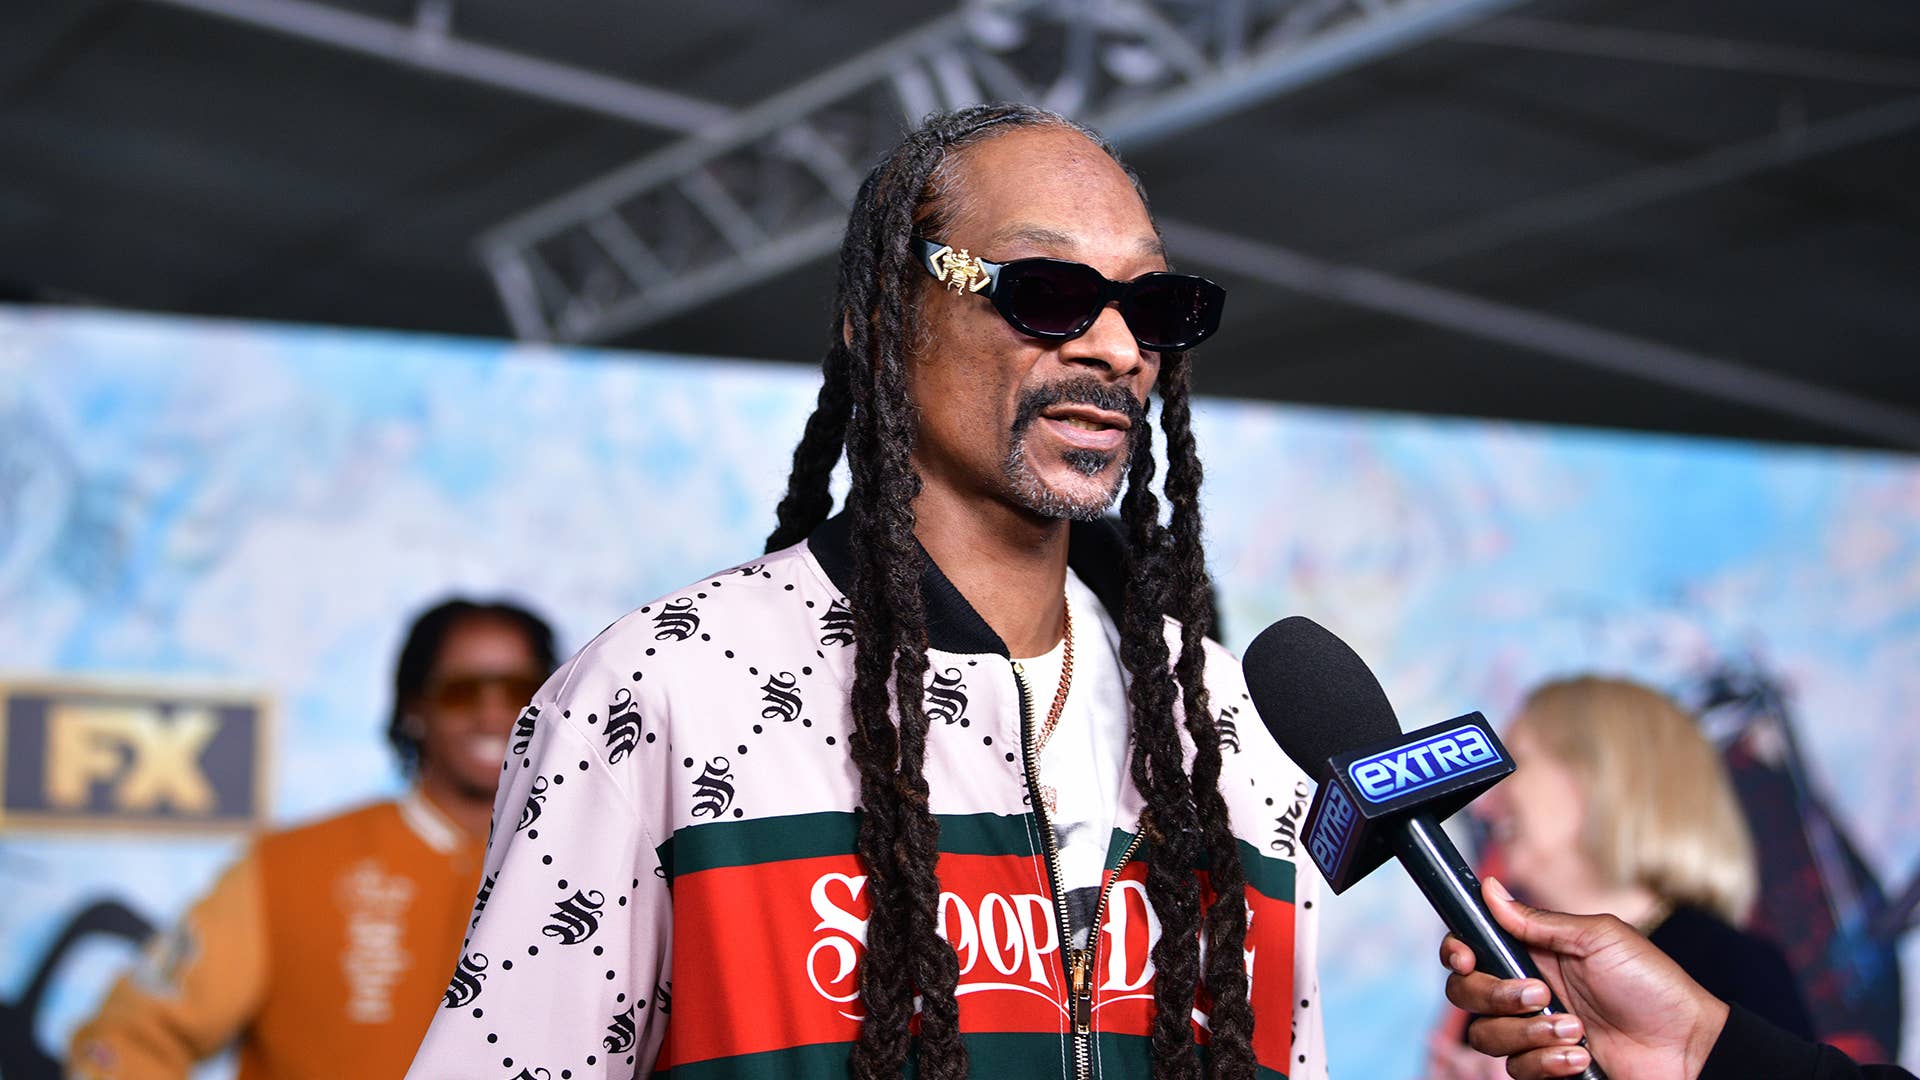 Snoop Dogg attends the premiere of FX's "Dear Mama" at Academy Museum of Motion Pictures